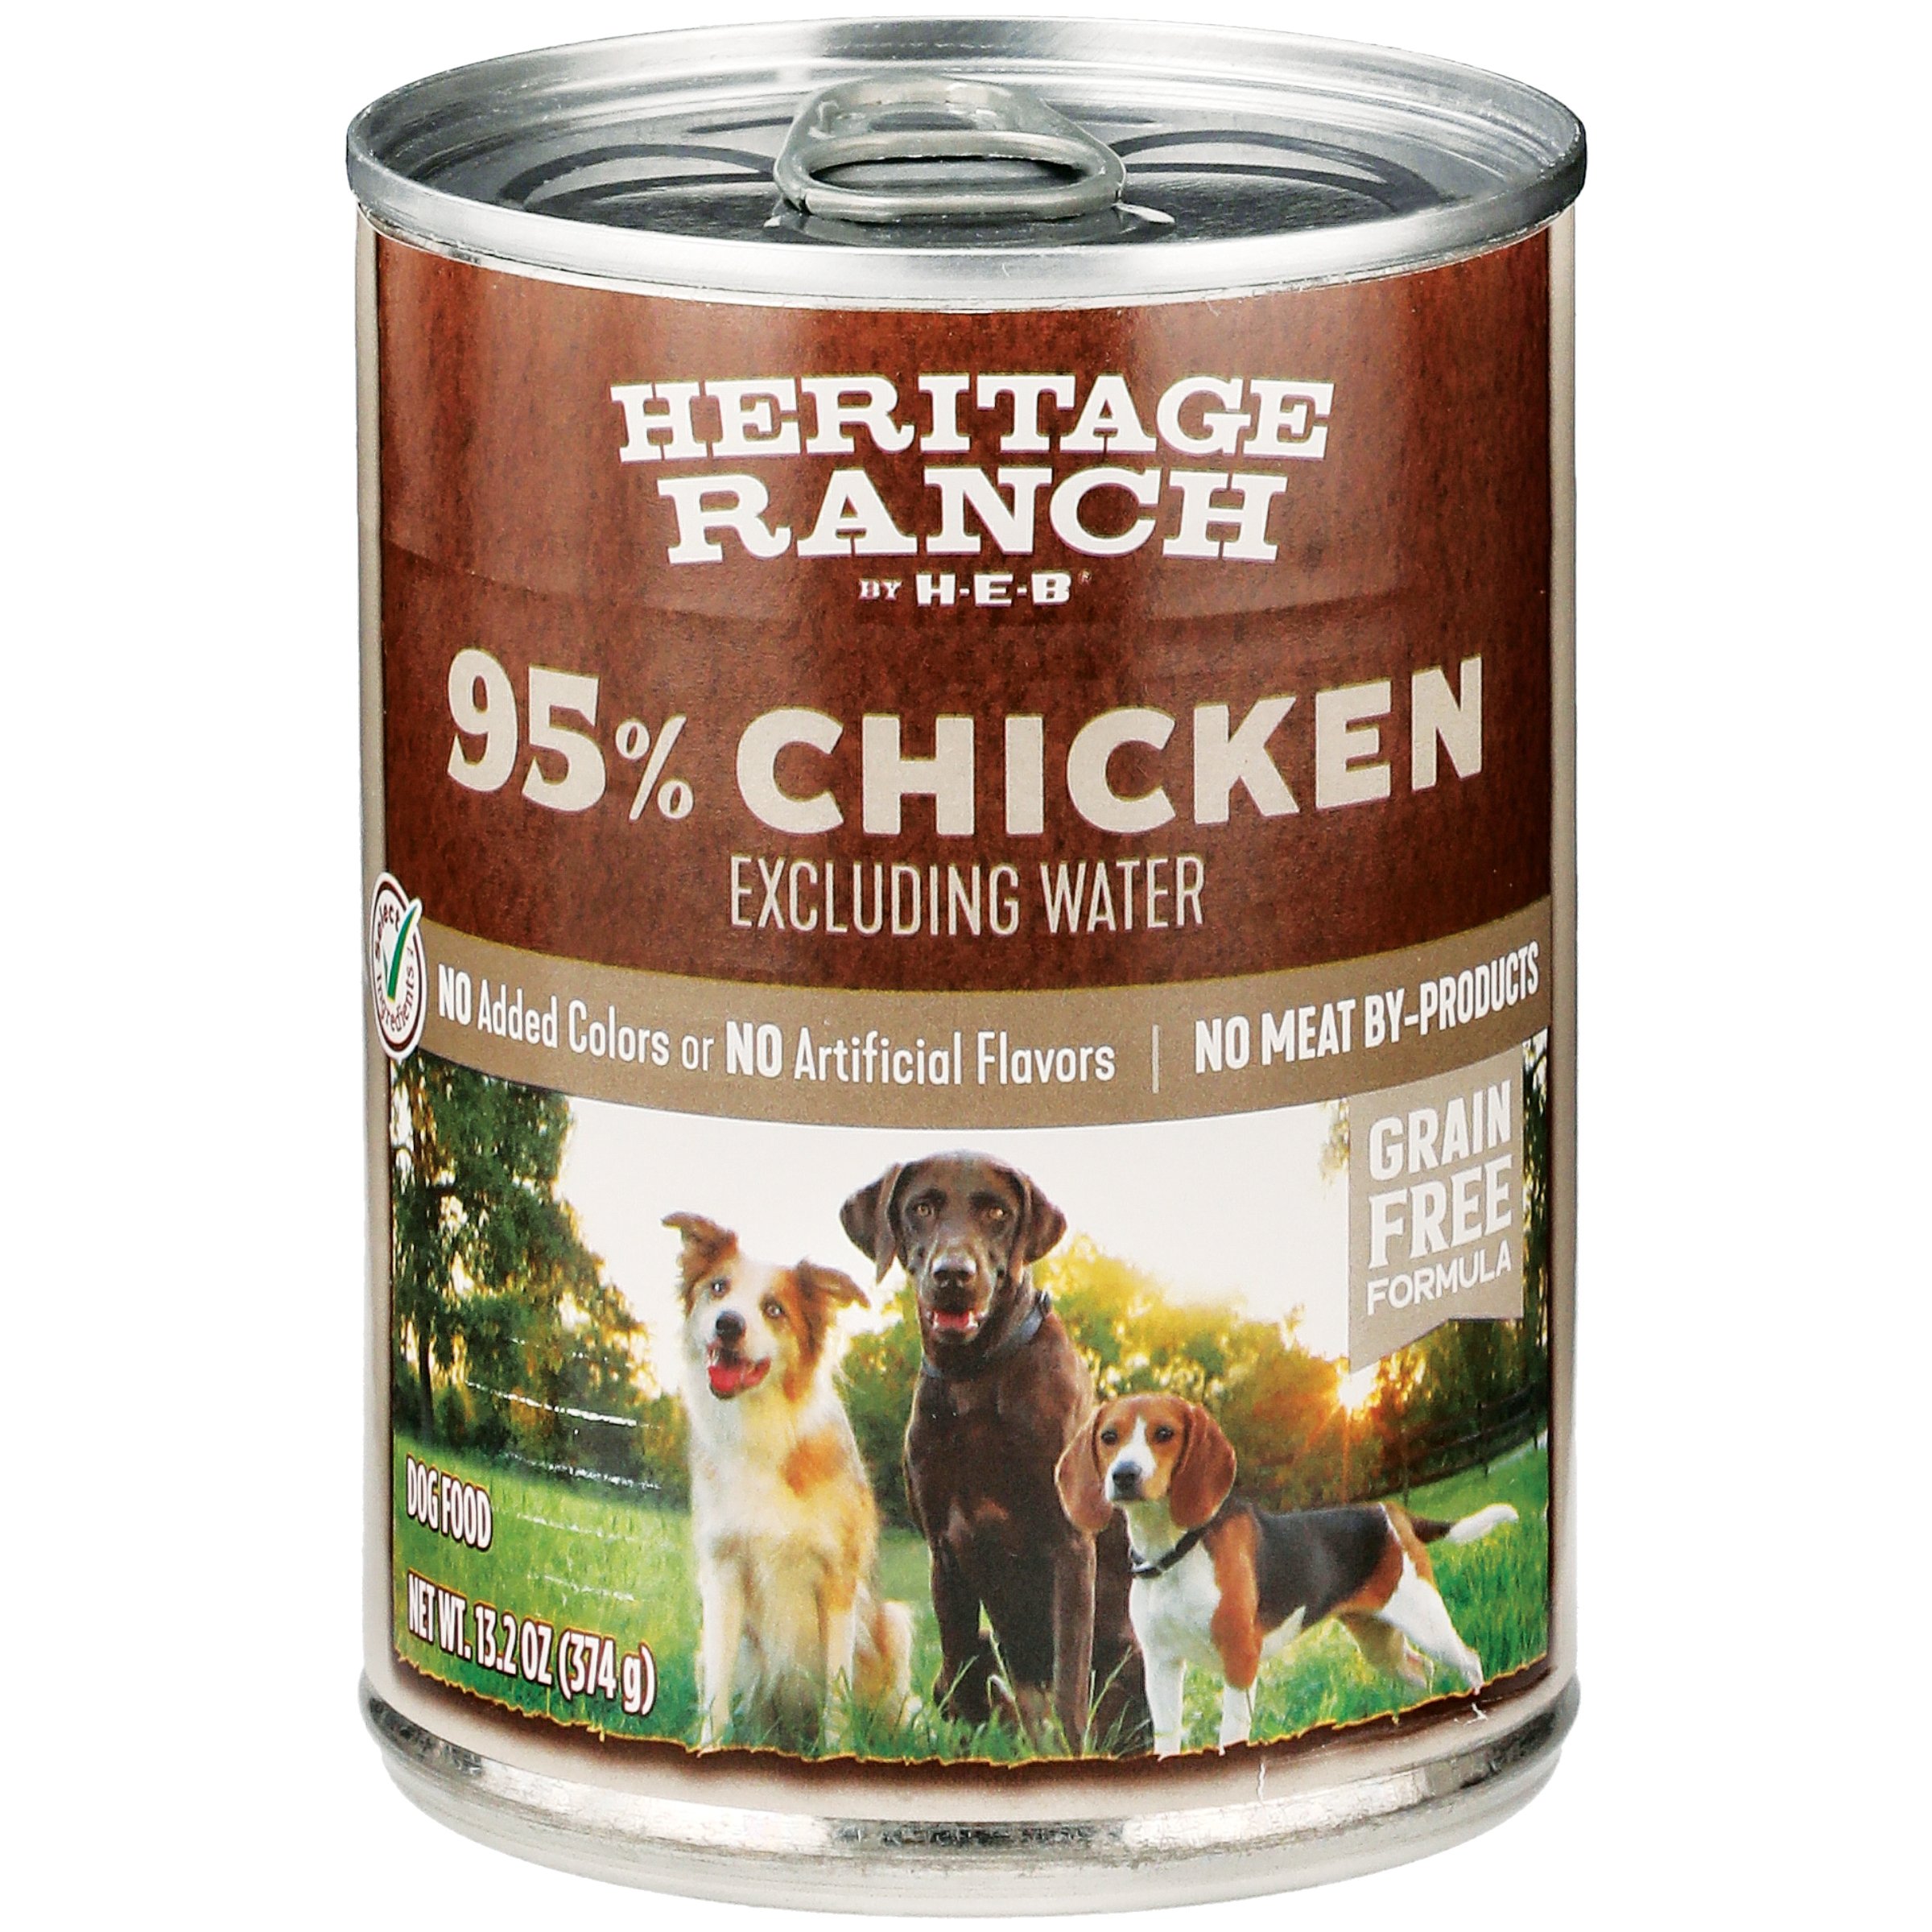 Heritage Ranch by HEB 95 Chicken Wet Dog Food Shop Dogs at HEB